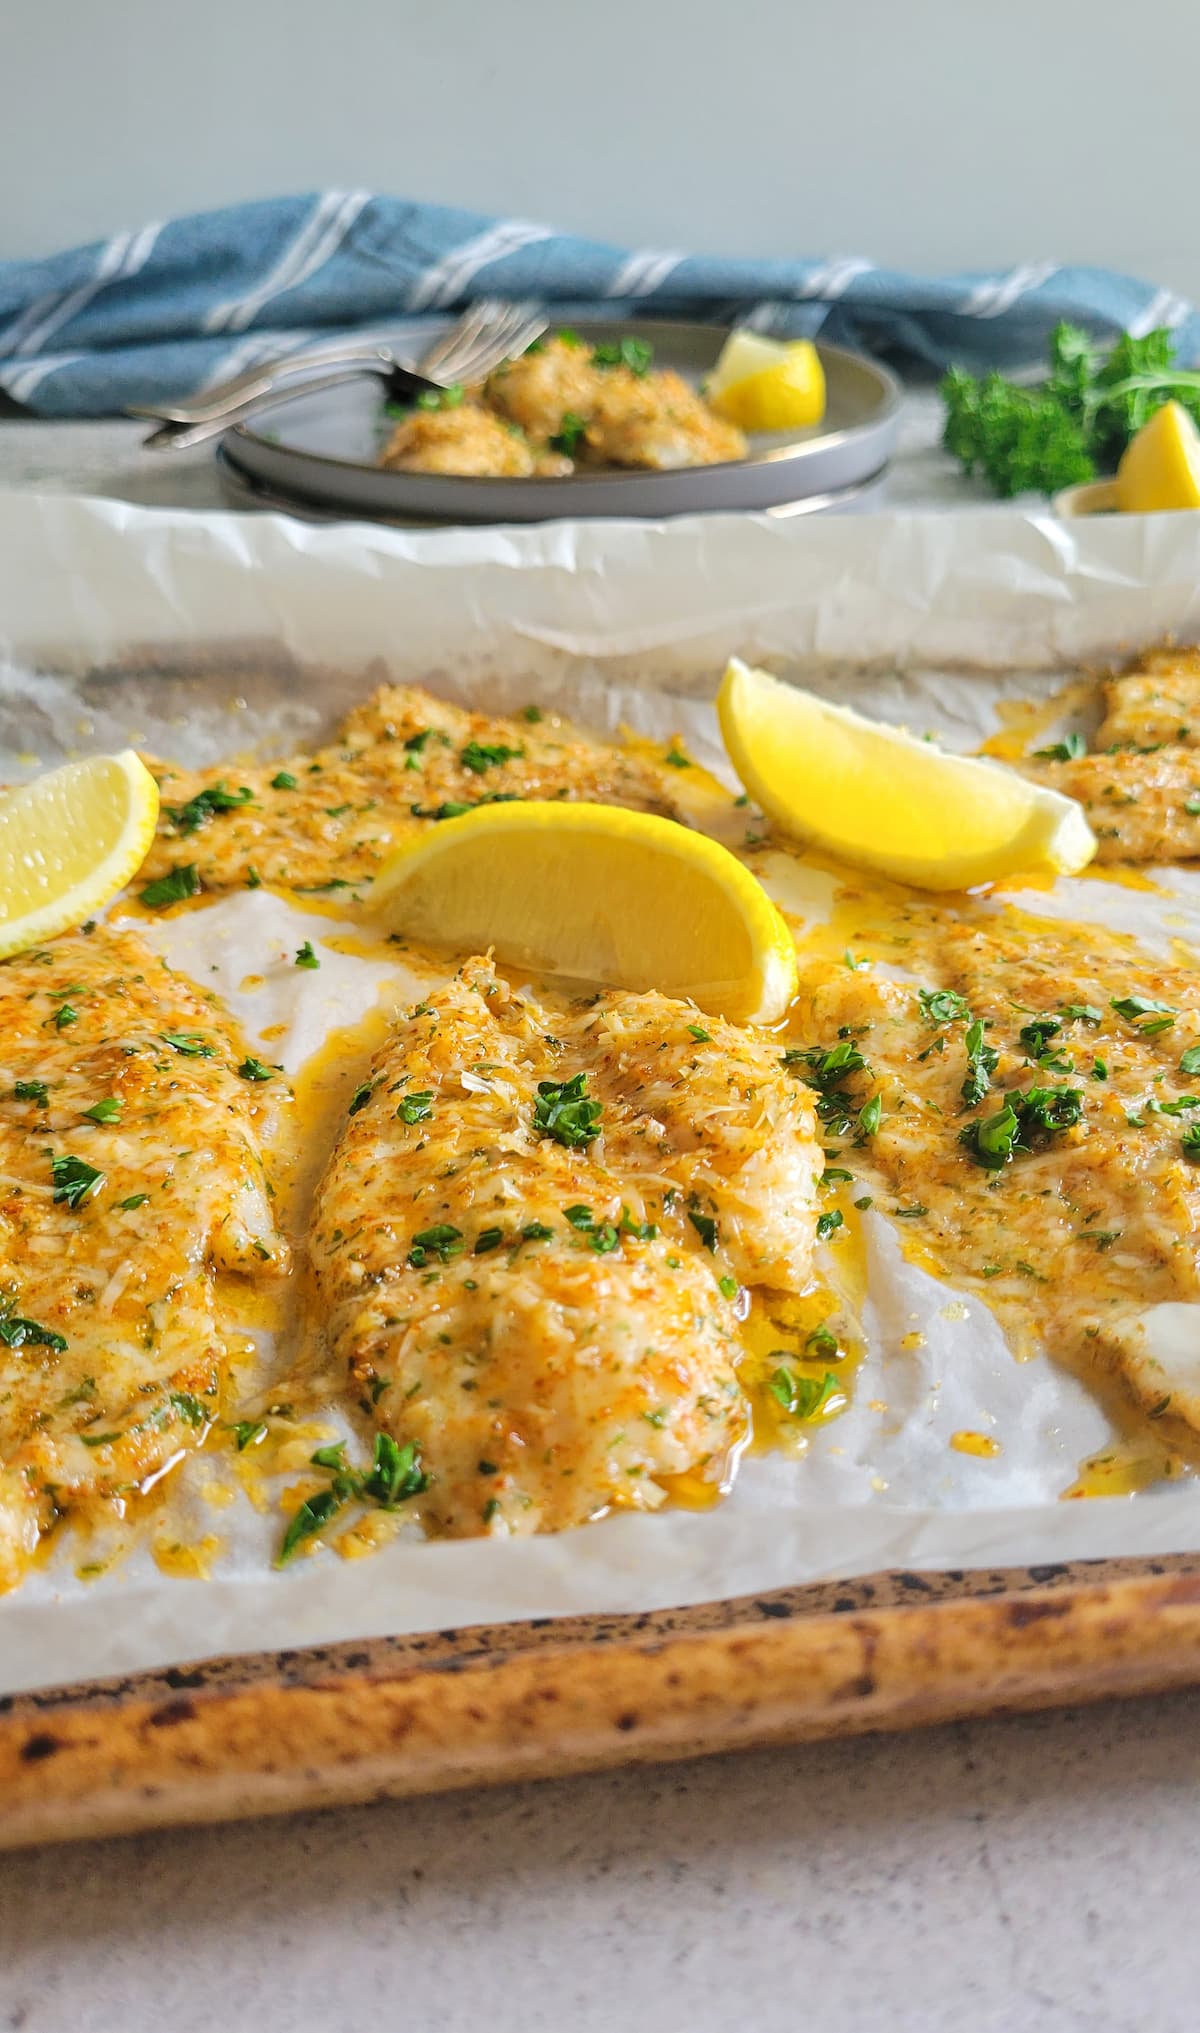 sheet pan of parmesan crusted fish garnished with fresh chopped parsley and lemon wedges, plate with some fish and lemon on it in the background